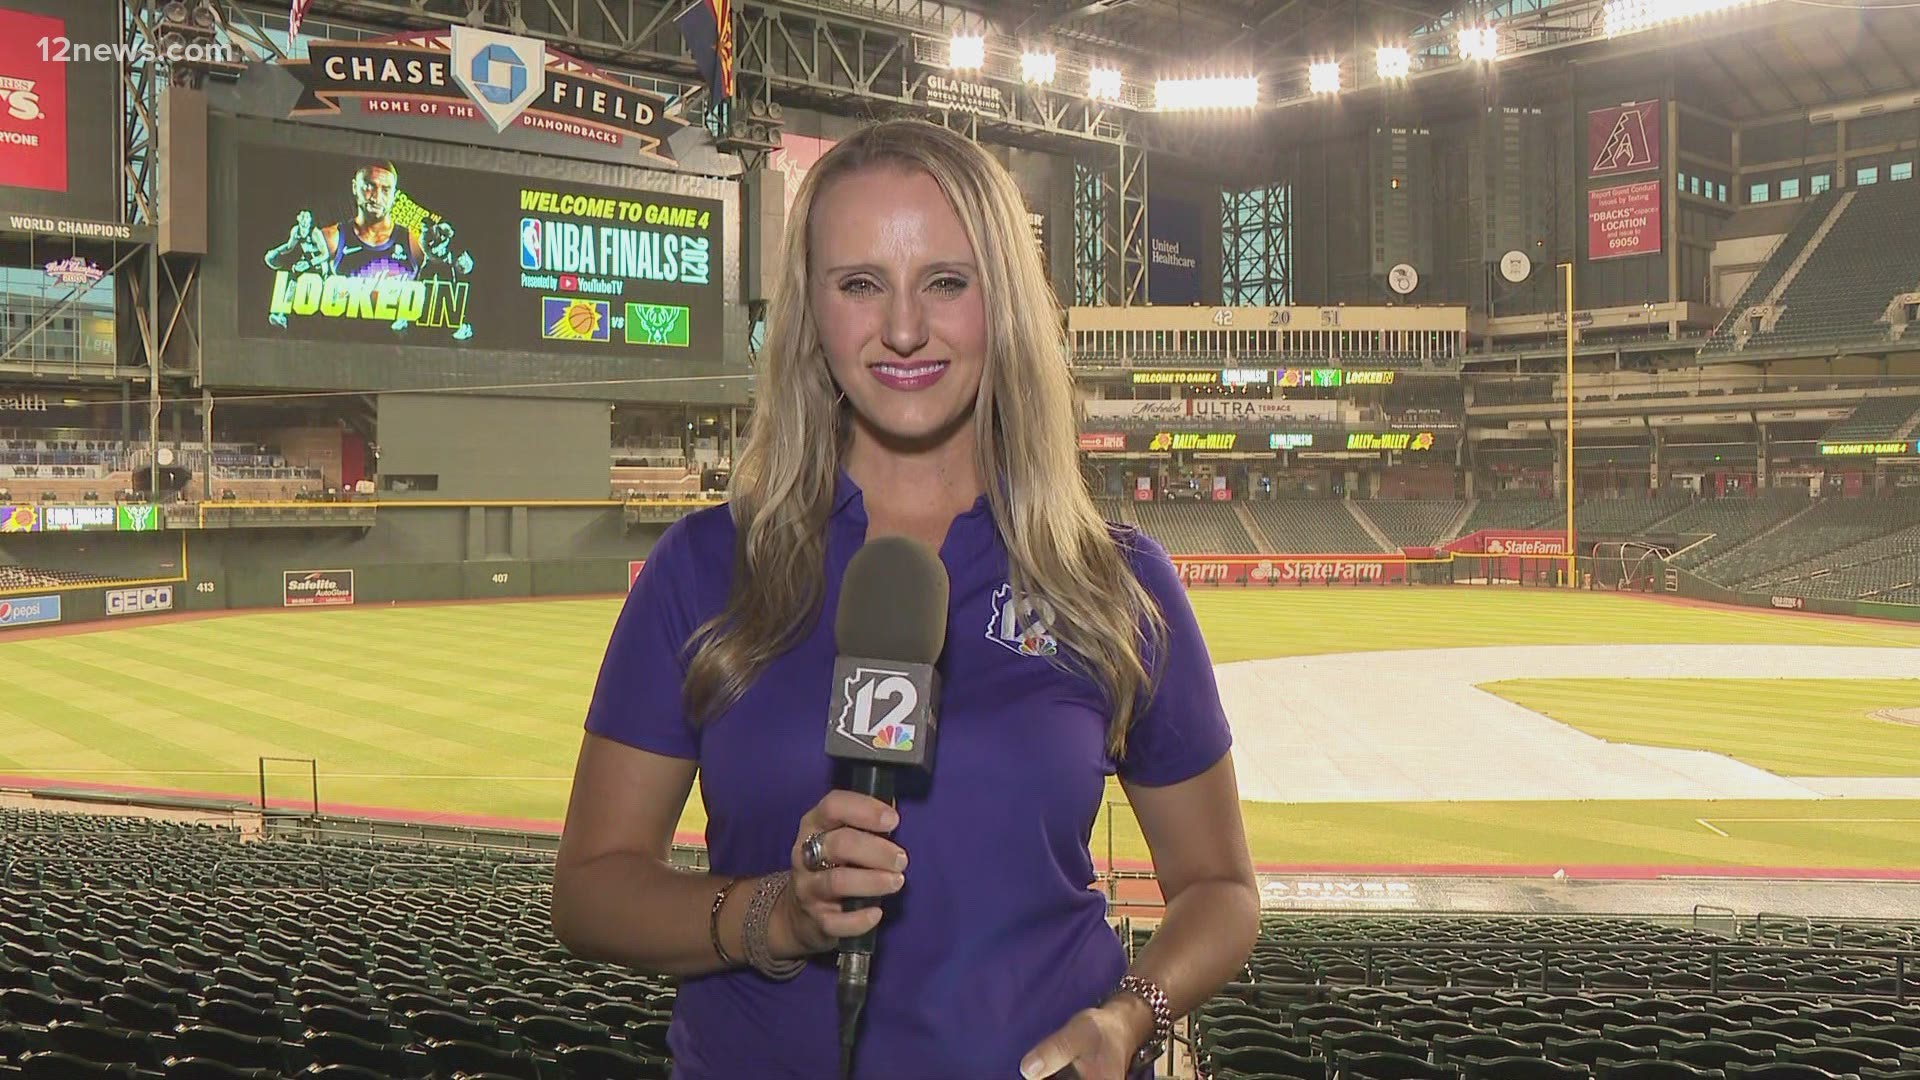 The Chase Field crew is ready to host the Suns Road Game Rally Wednesday night. Trisha Hendricks has a preview.